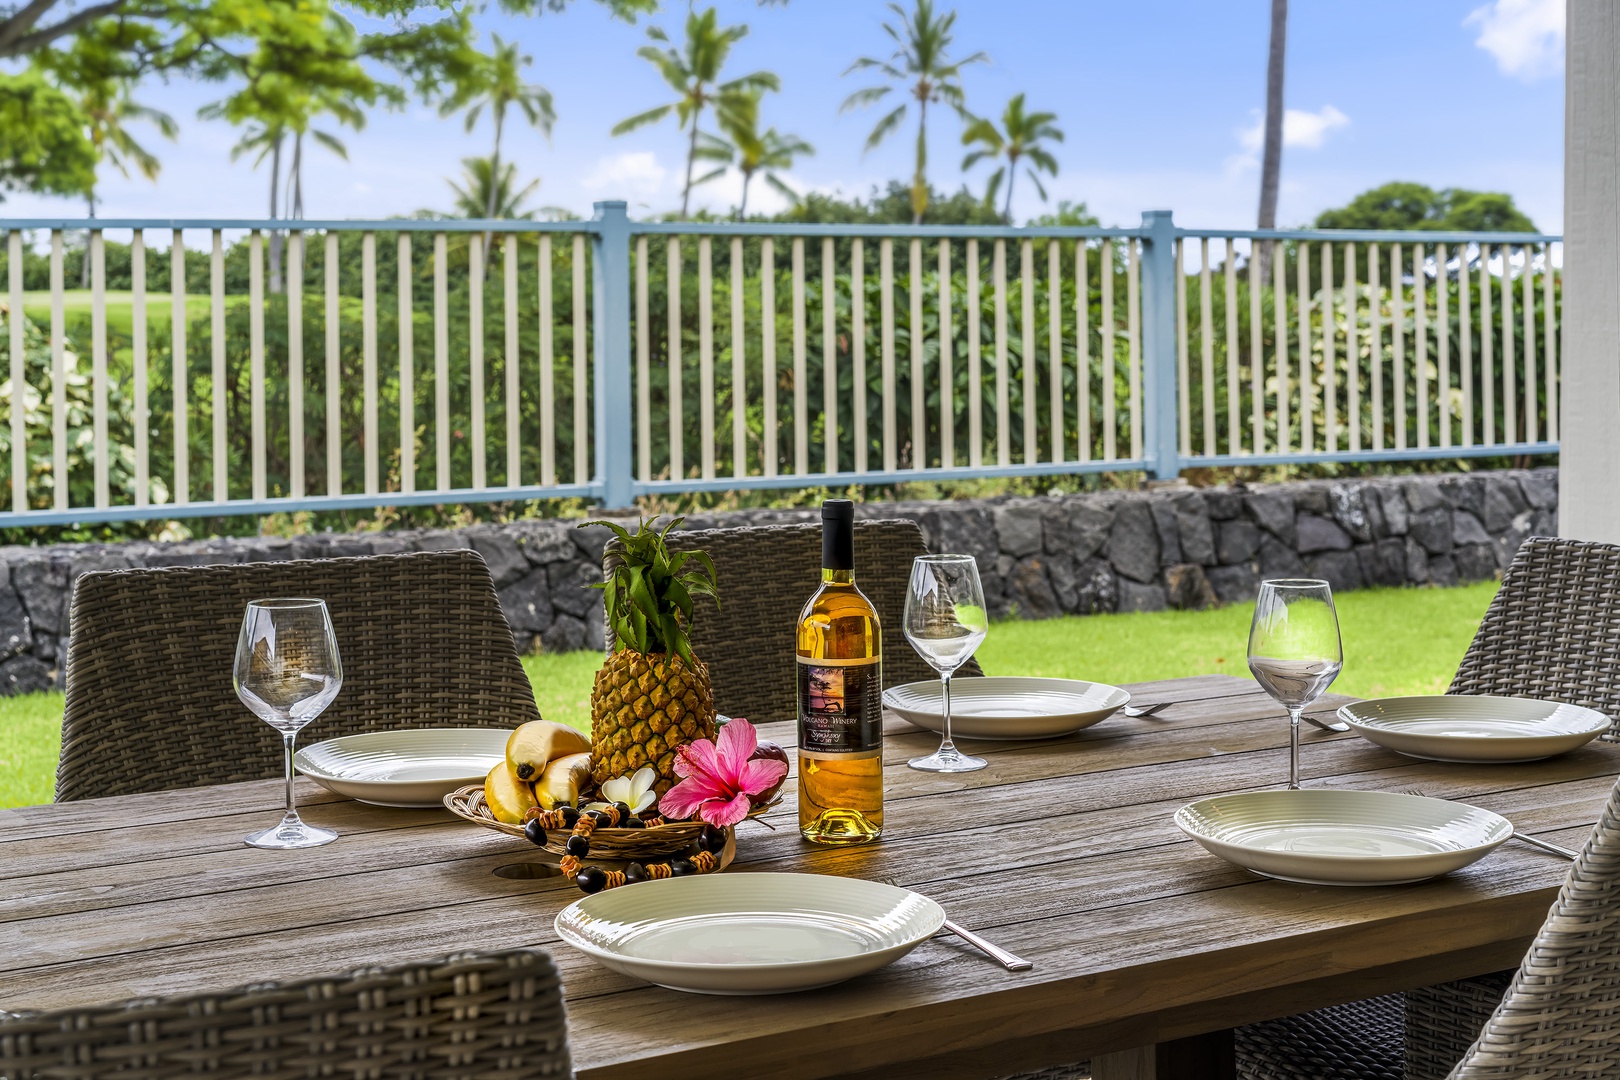 Kailua Kona Vacation Rentals, Holua Kai #9 - Settle in with your favorite beverage in this beautiful Home away from Home